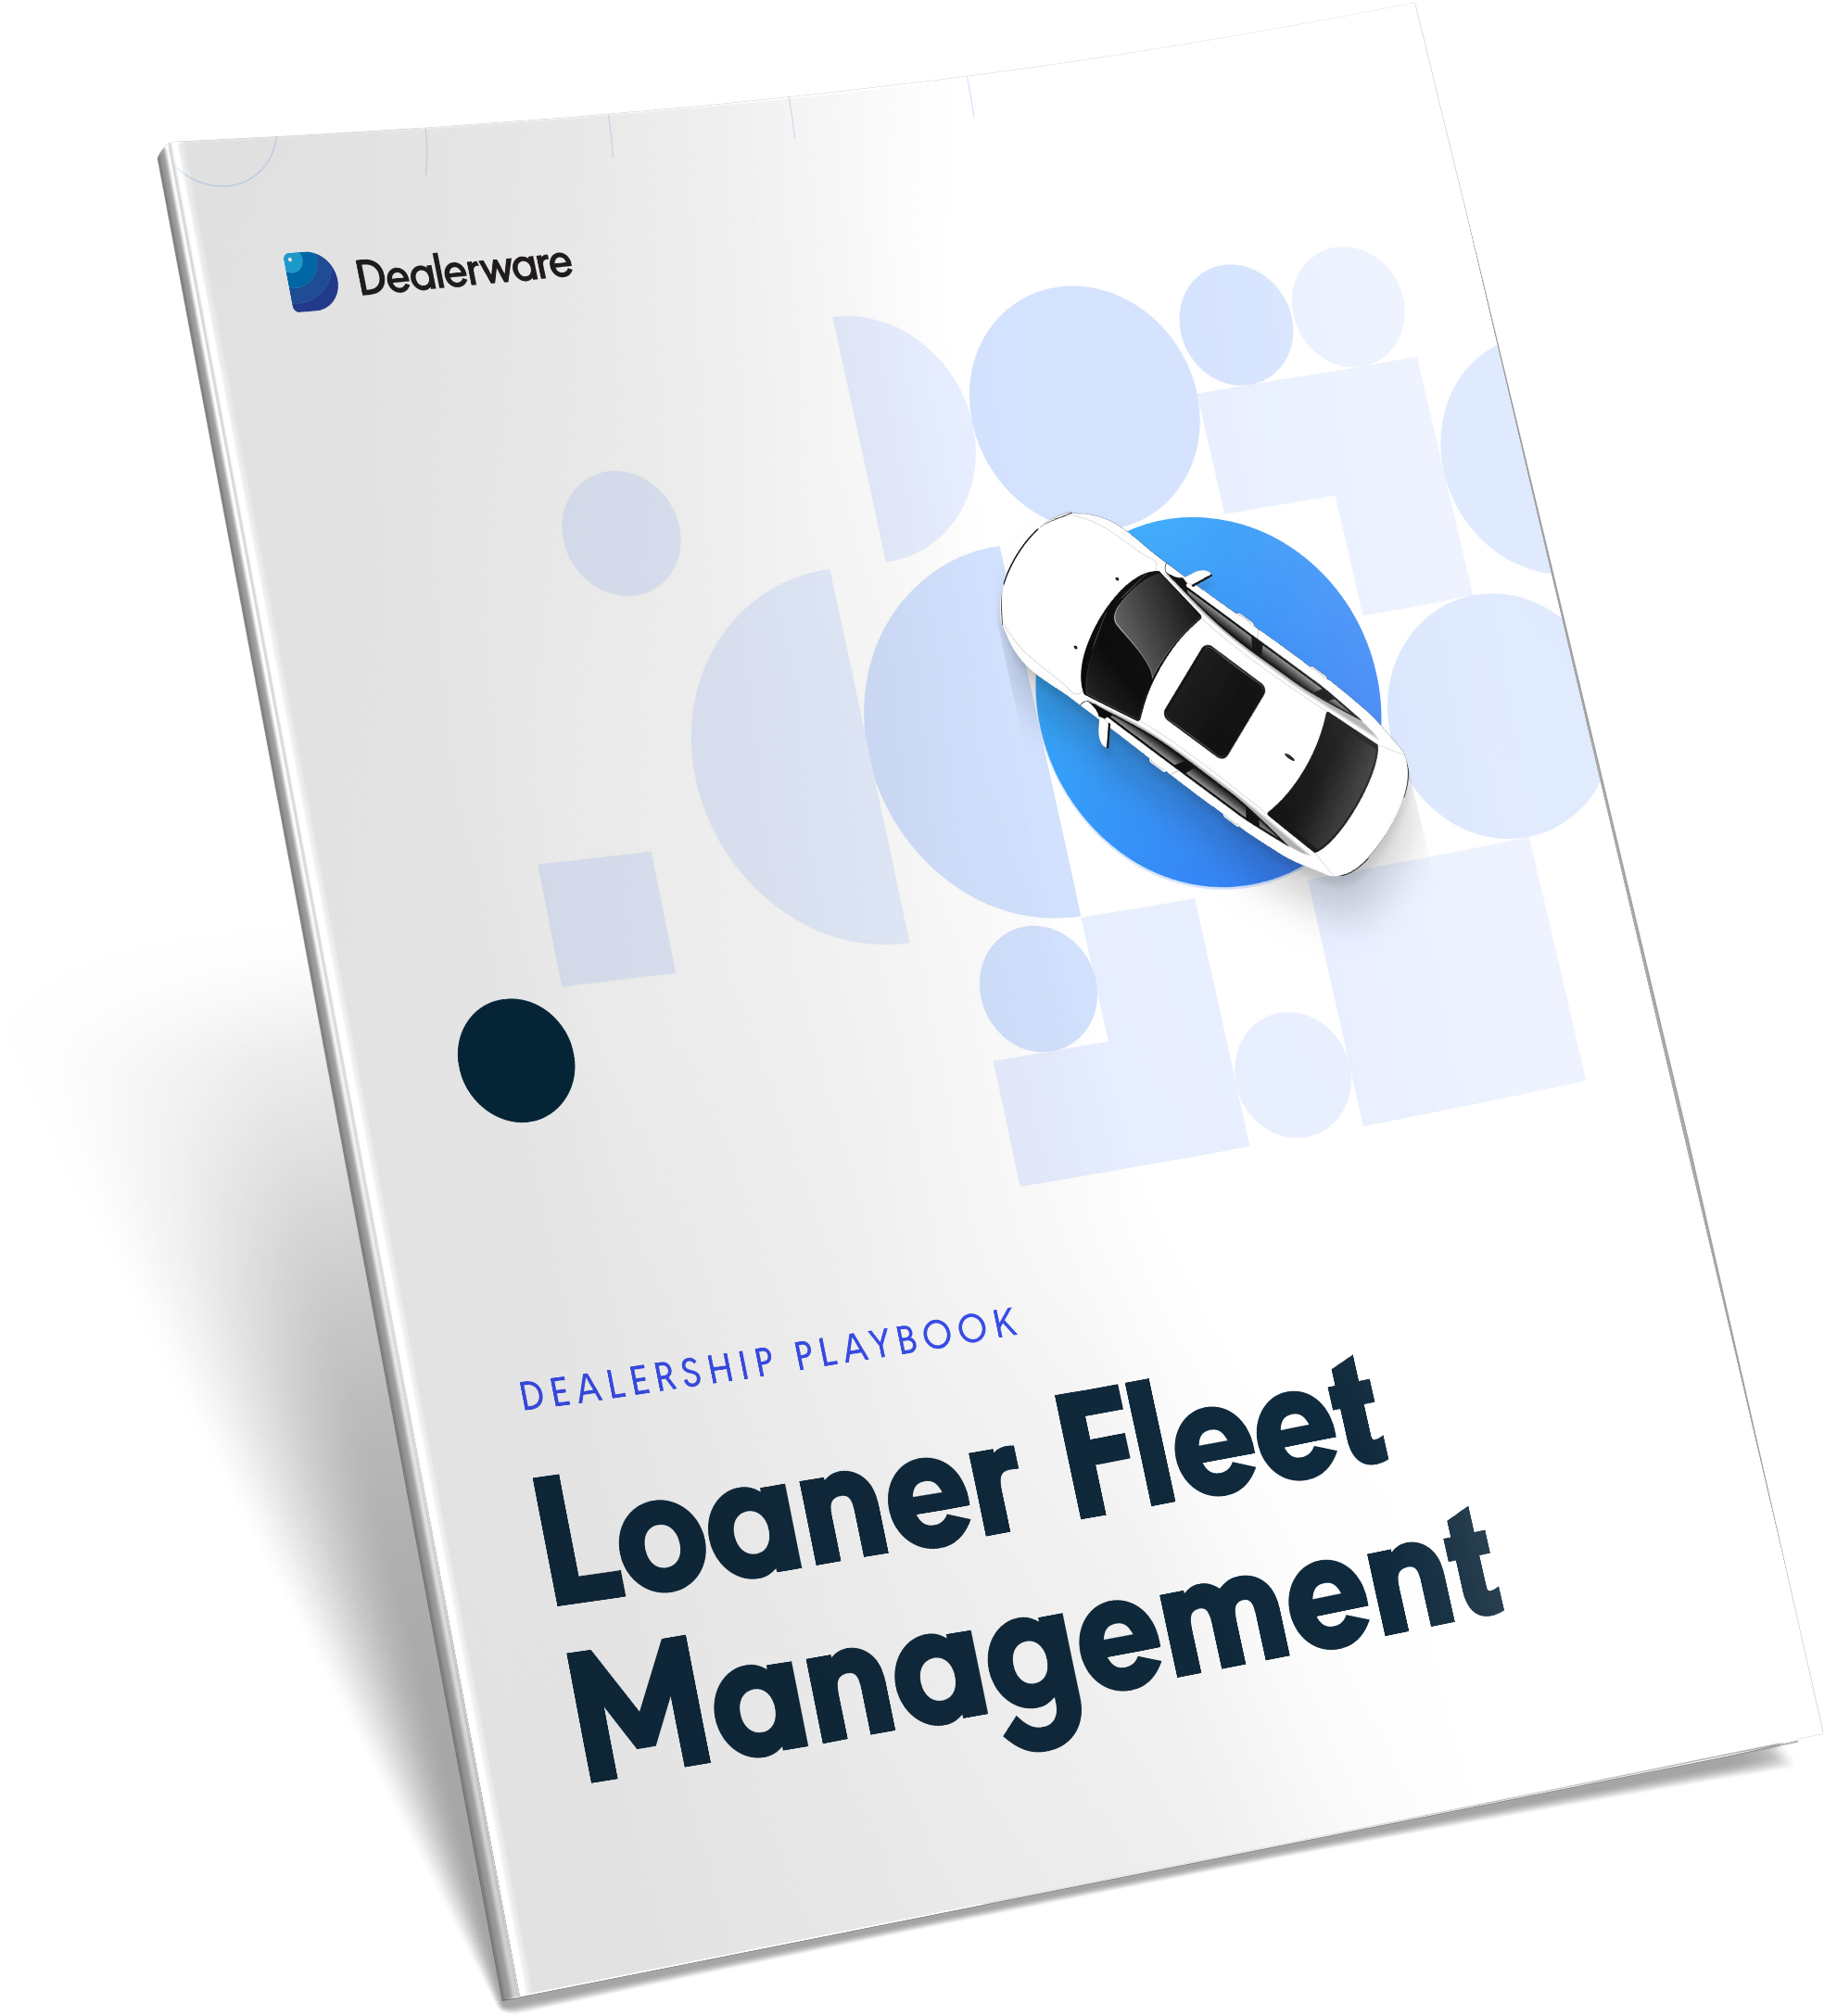 Dealerware's loaner fleet management playbook will teach you how to launch a new courtesy loaner fleet, create excellent dealership customer service experiences, and minimize the costs of operating a courtesy loaner fleet.